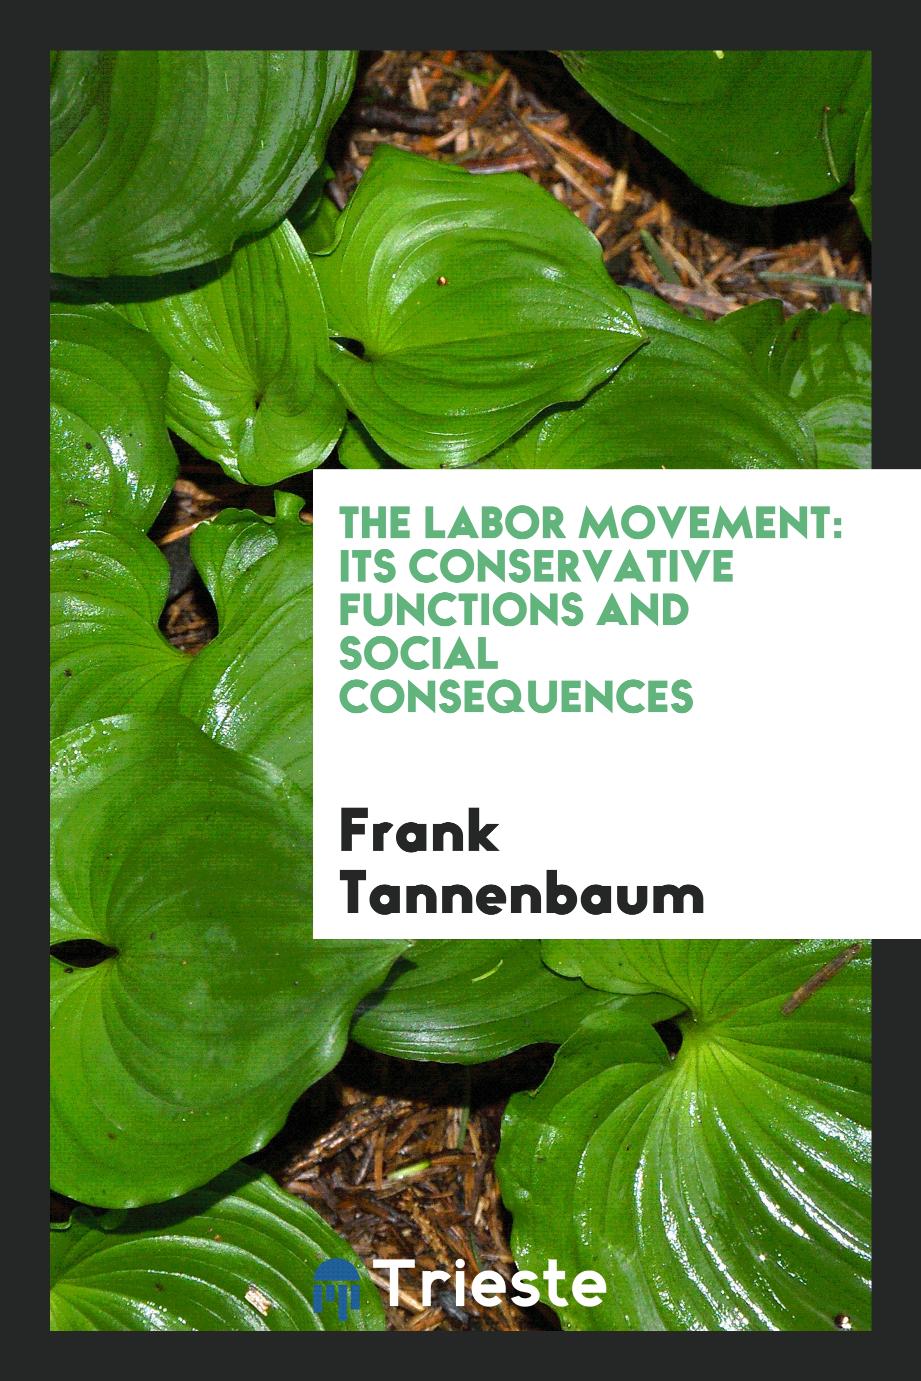 The labor movement: its conservative functions and social consequences